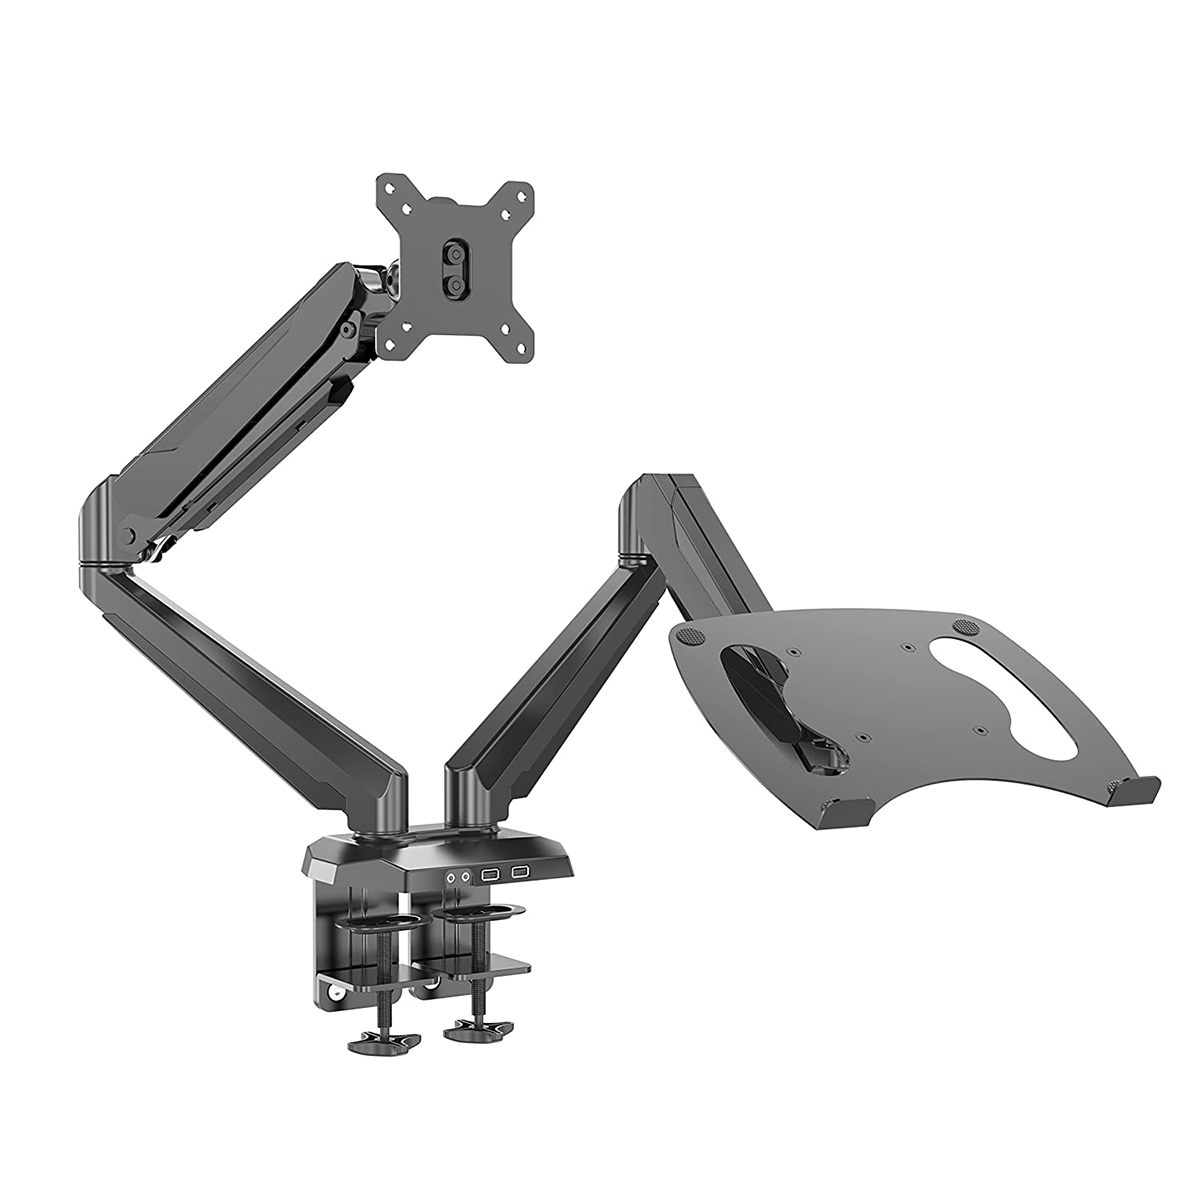 Dual Monitor Stand Desk Mount 2 Arm with Laptop Holder Tray Adapter Computer Screen Bracket up to 32" 8kg per arm acatana ACA-GM224U-D15